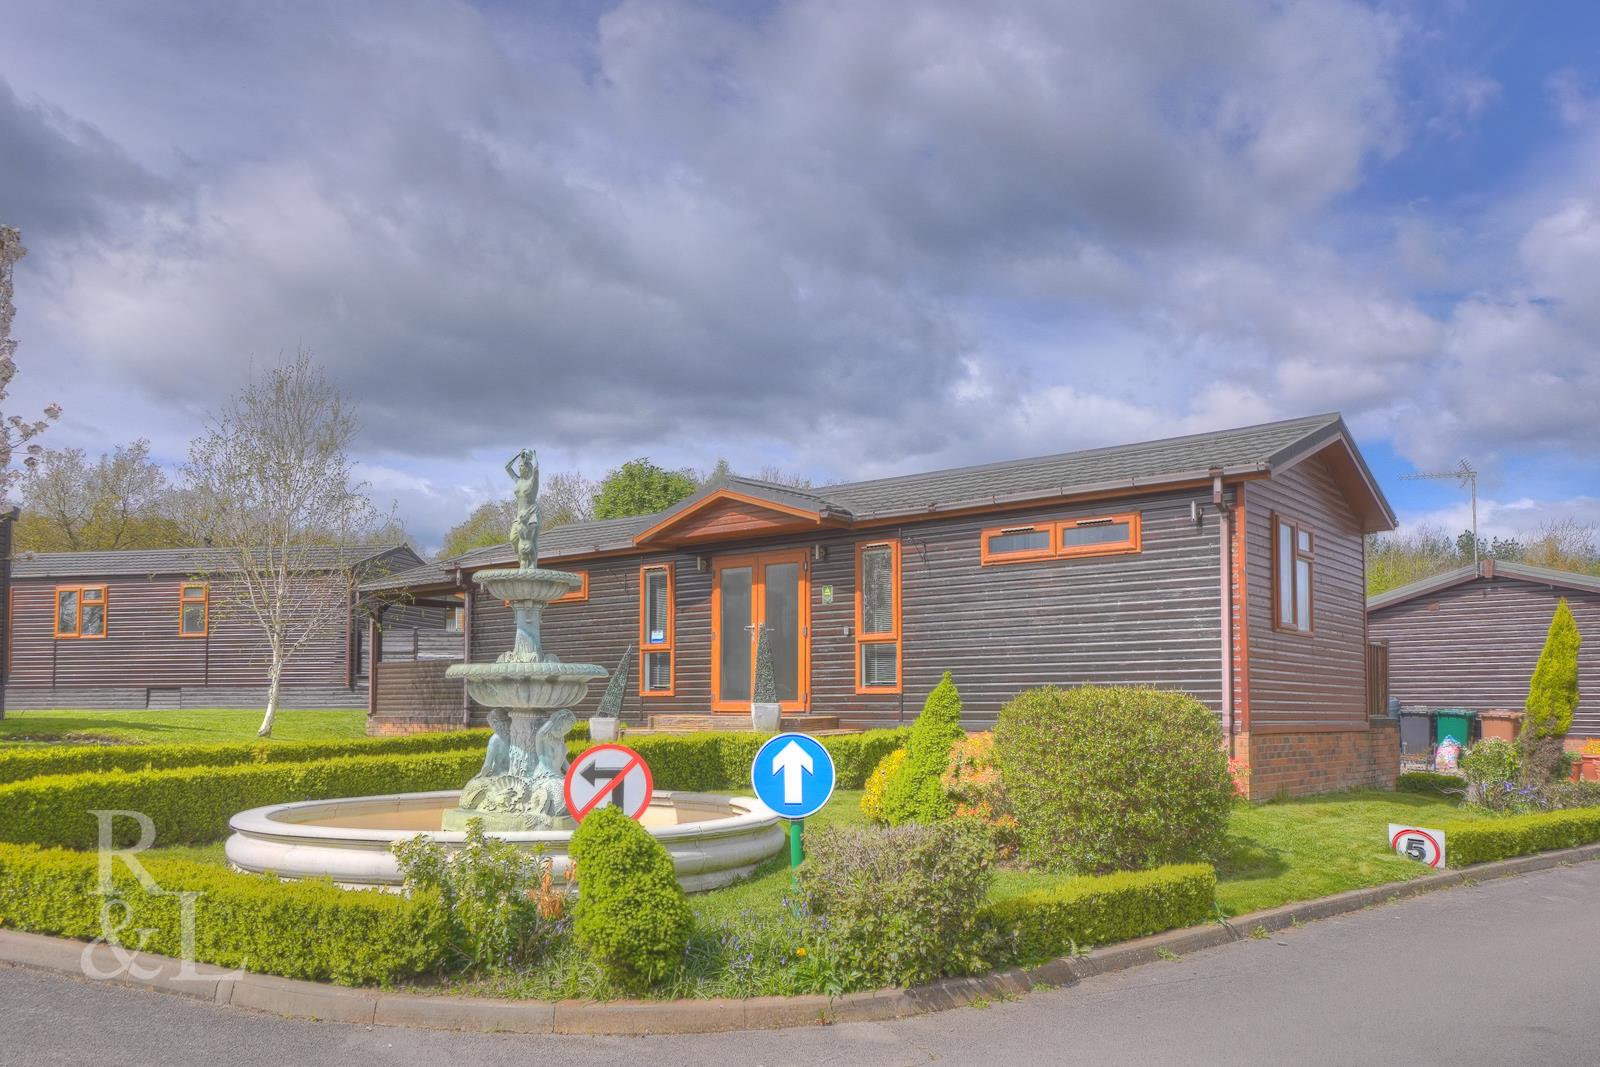 Property image for Swainswood Luxury Lodges, Overseal, Derbyshire